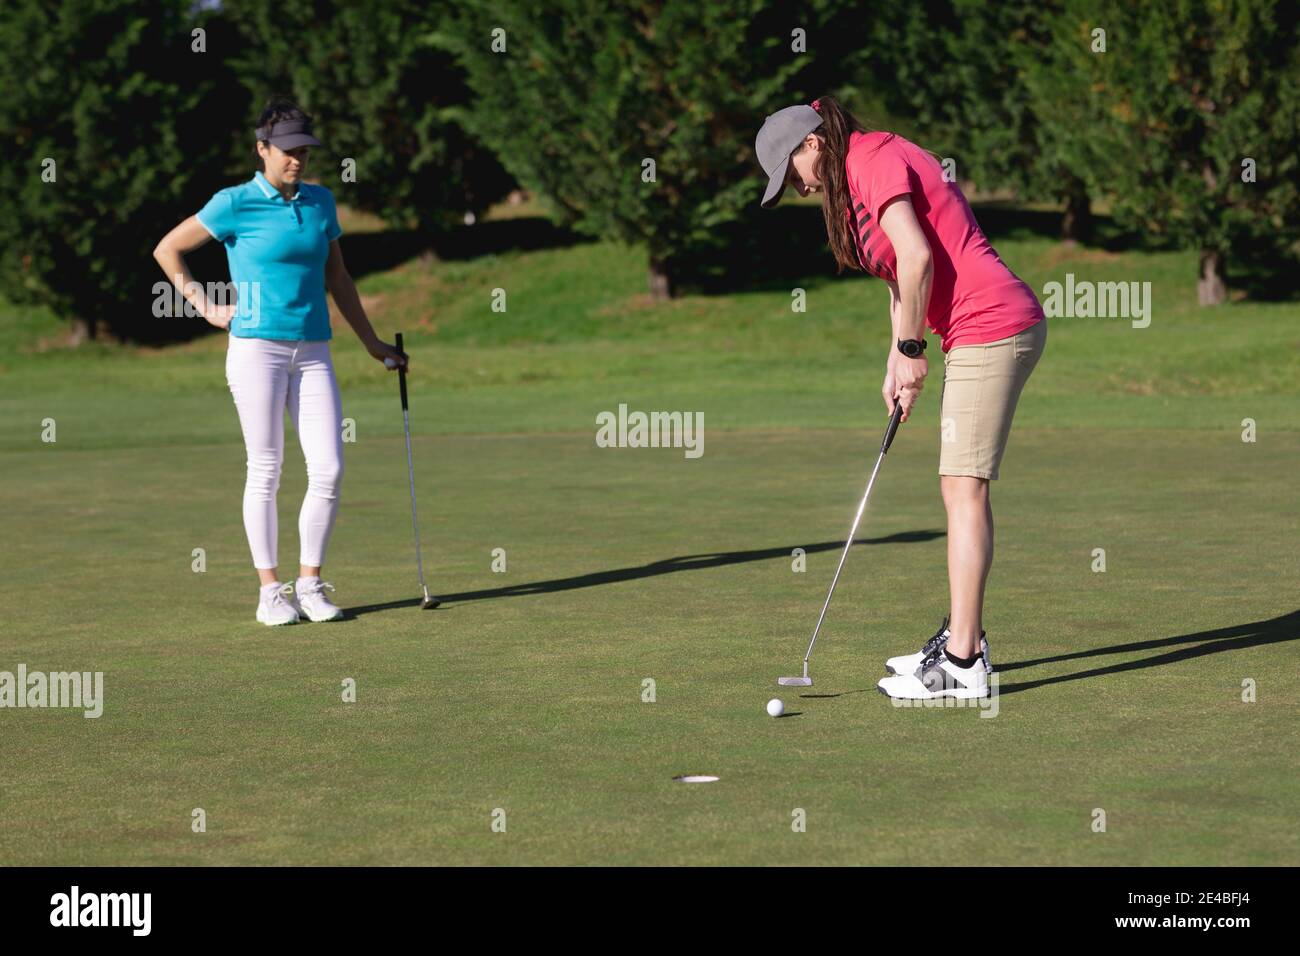 Two caucasian women playing golf one taking a shot at the hole Stock Photo